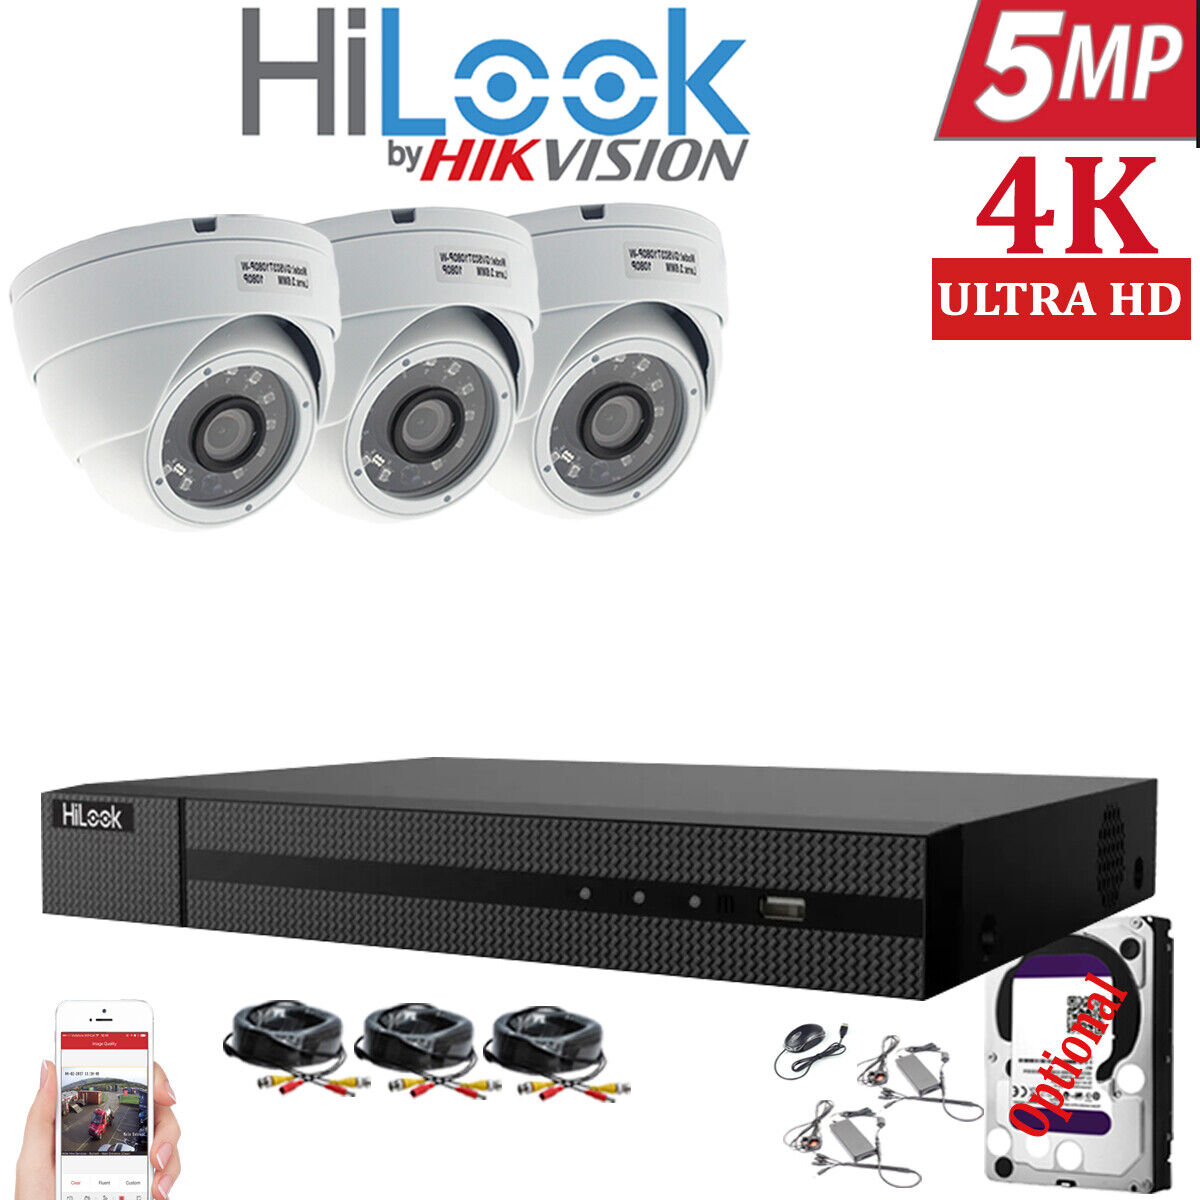 HIKVISION HILOOK 5MP CCTV SYSTEM 4CH DVR FULL HD 20M NIGHT VISION DOME CAMERAS 3x Cameras (White) 1TB HDD